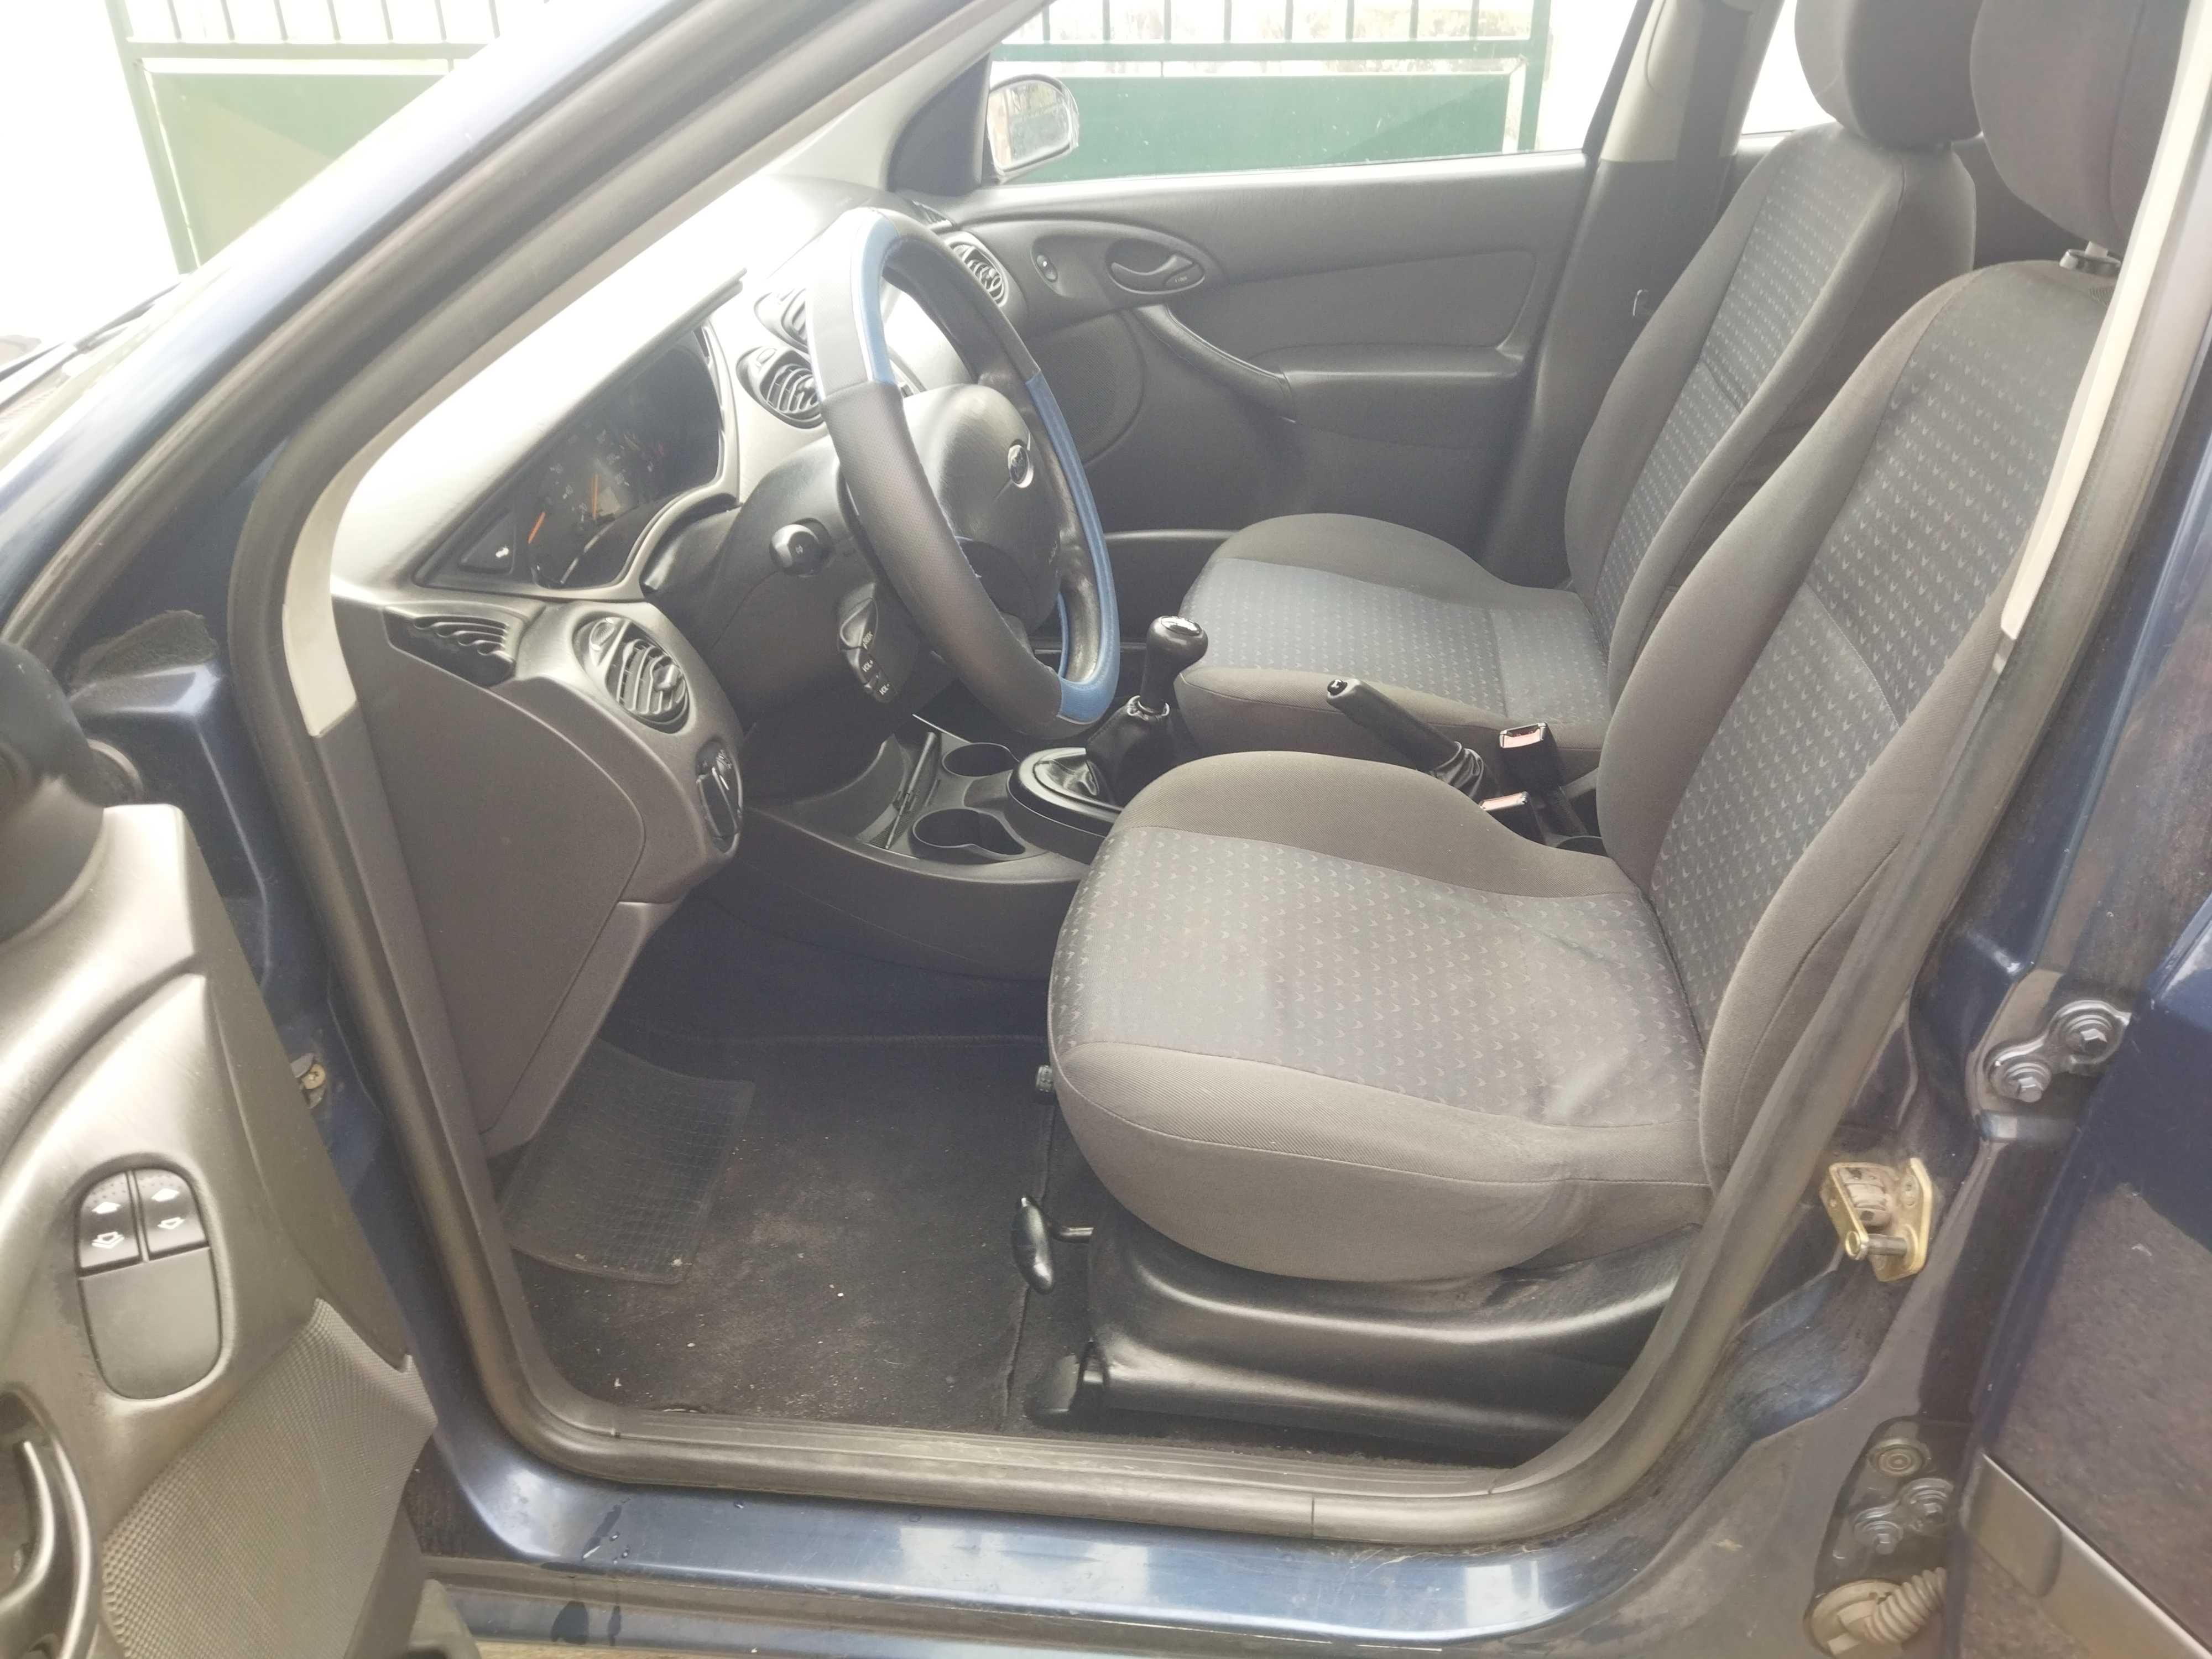 Ford Focus 1.4 Ambient